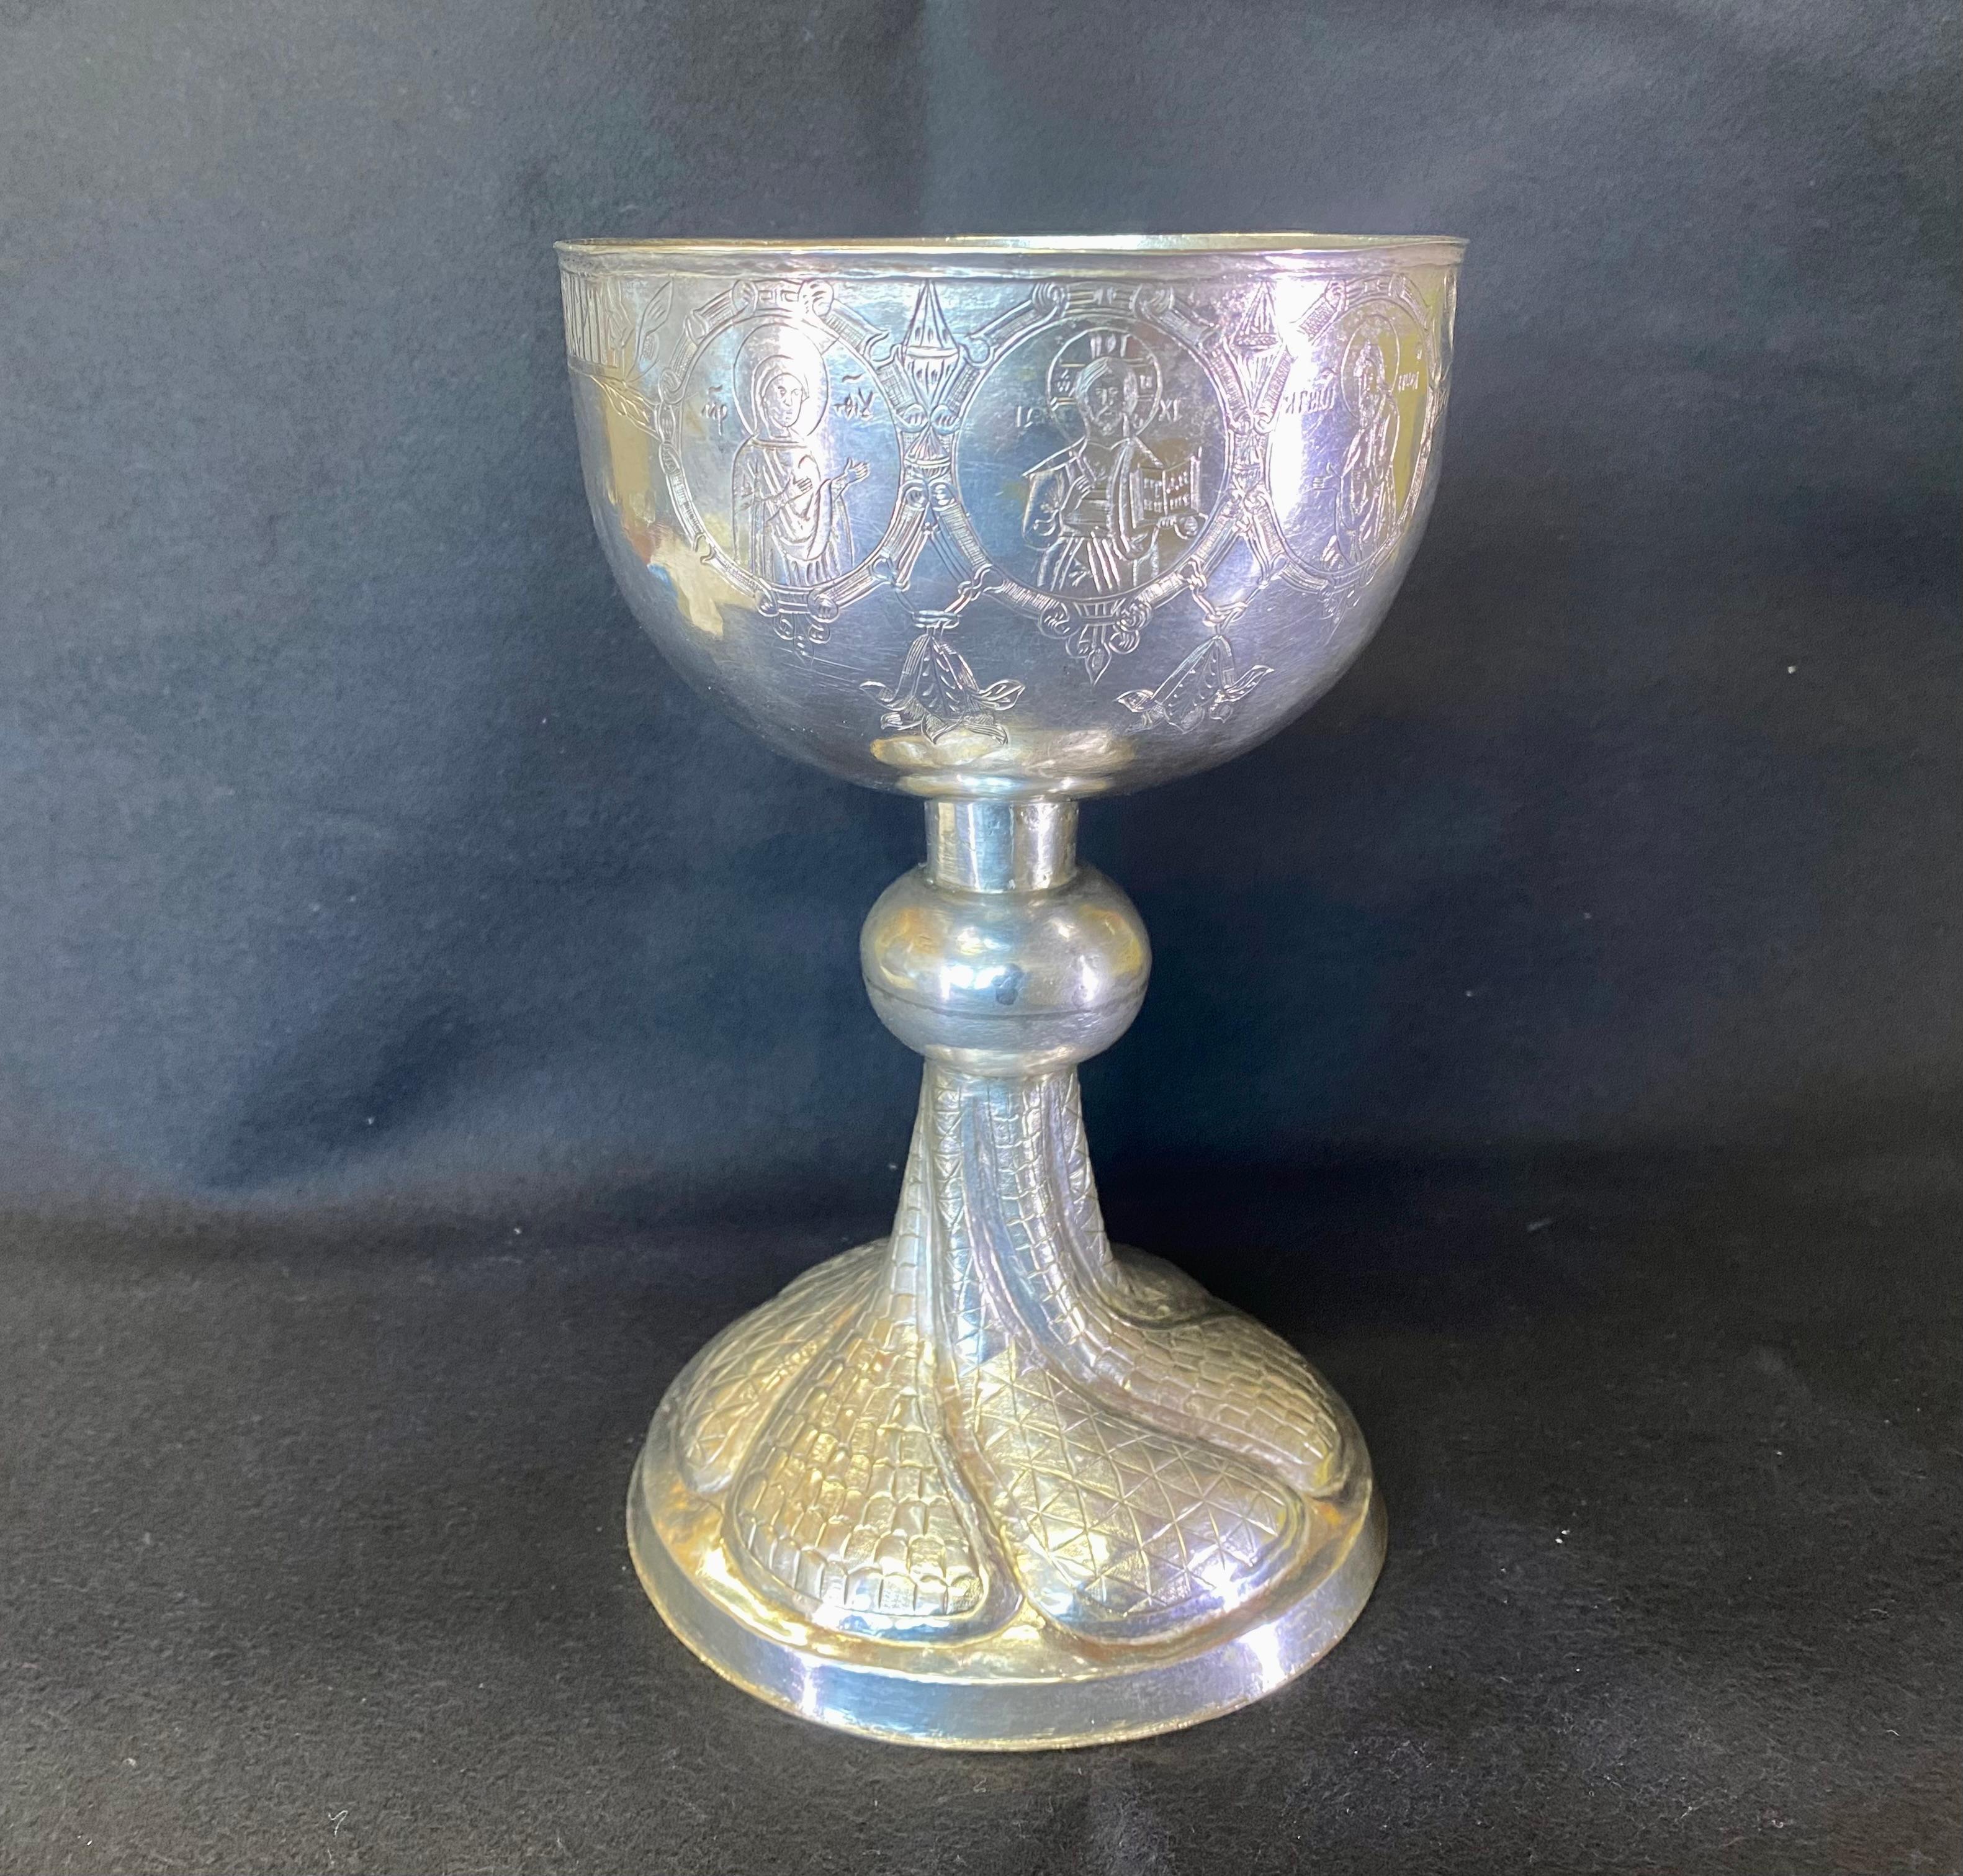 Chalice
Russia or the Baltics, or a country formerly under Russian control.
I'm not an expert on these Church objects, maybe someone knows more?
Probably 18th century.
Could be older too. 17th century ?
Silver, unstamped, engraved decoration, h.